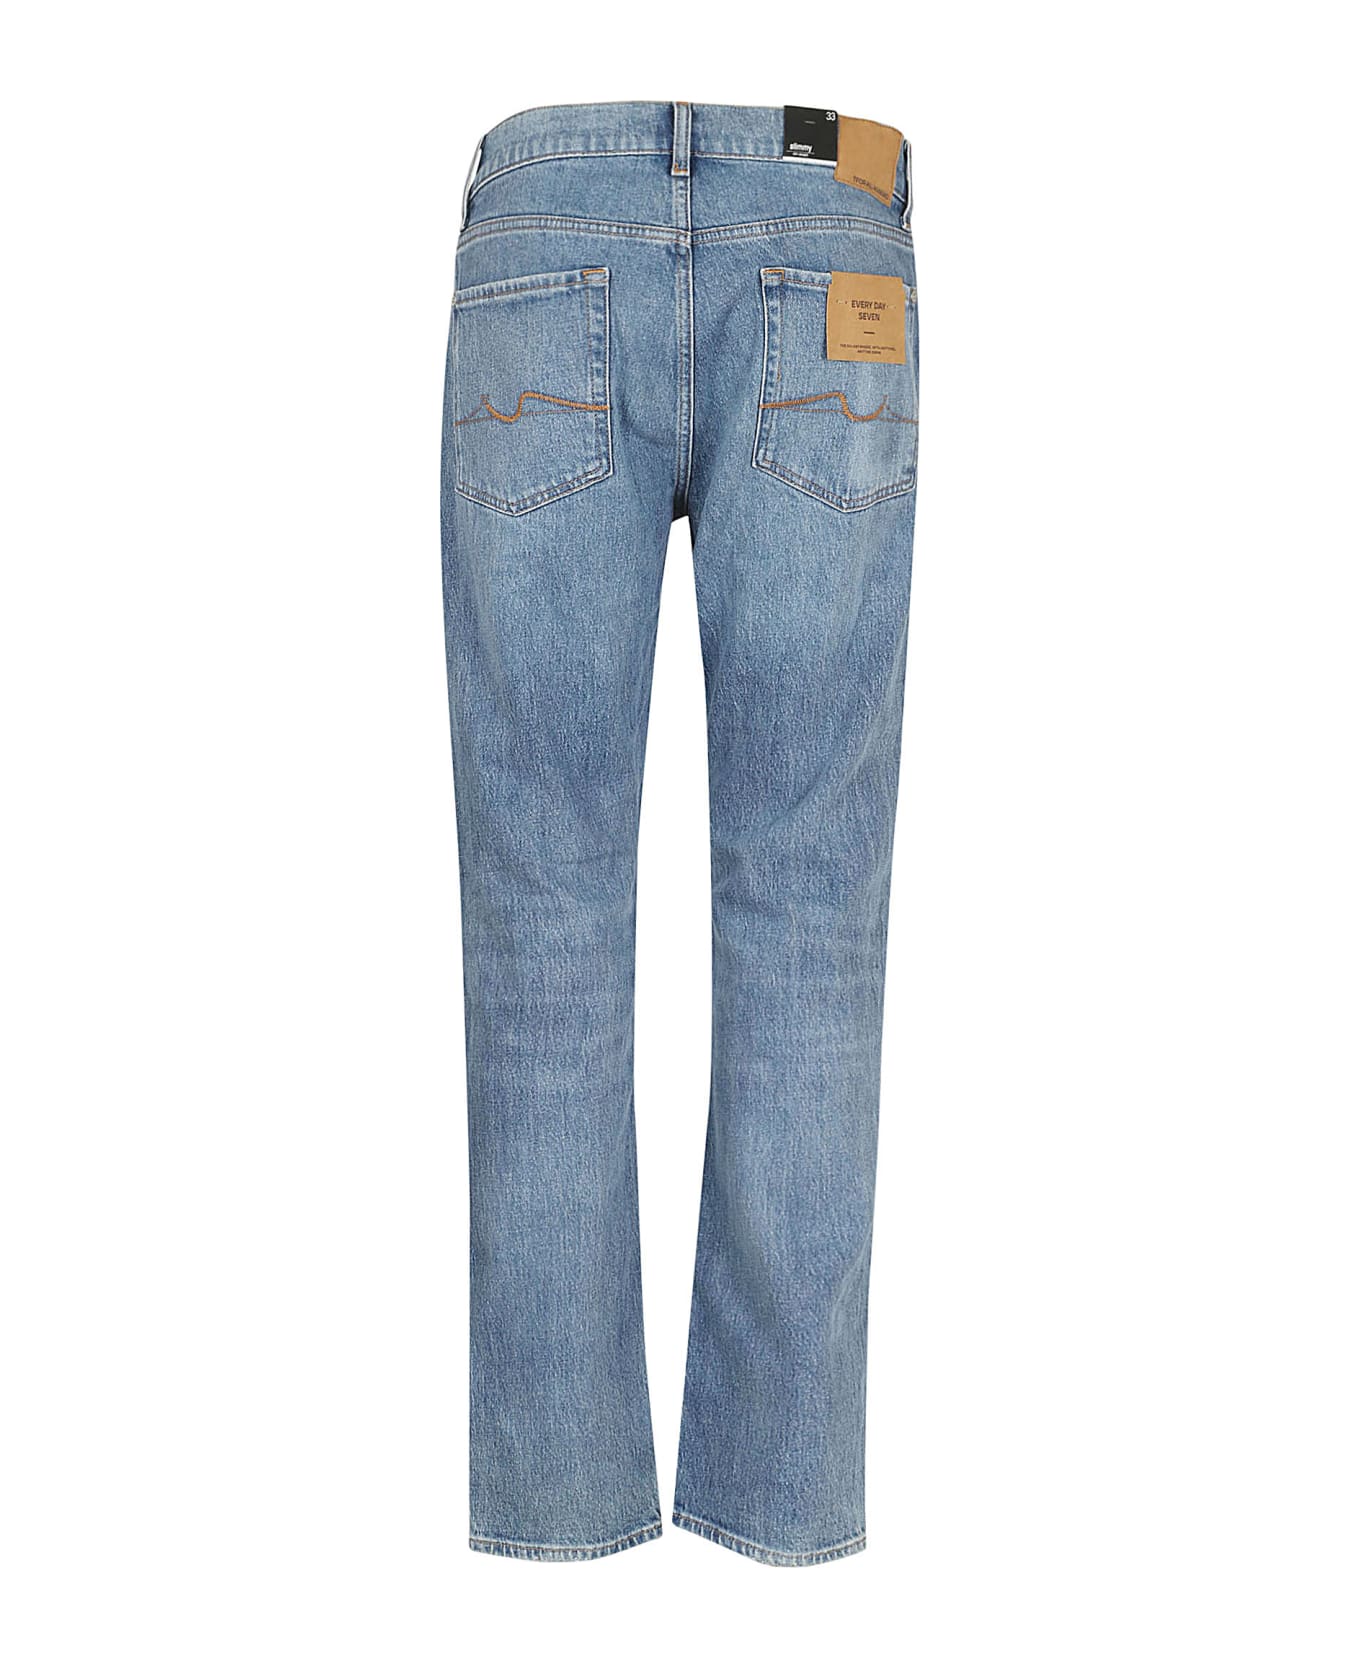 7 For All Mankind Slimmy Get Ahead - Light Blue デニム